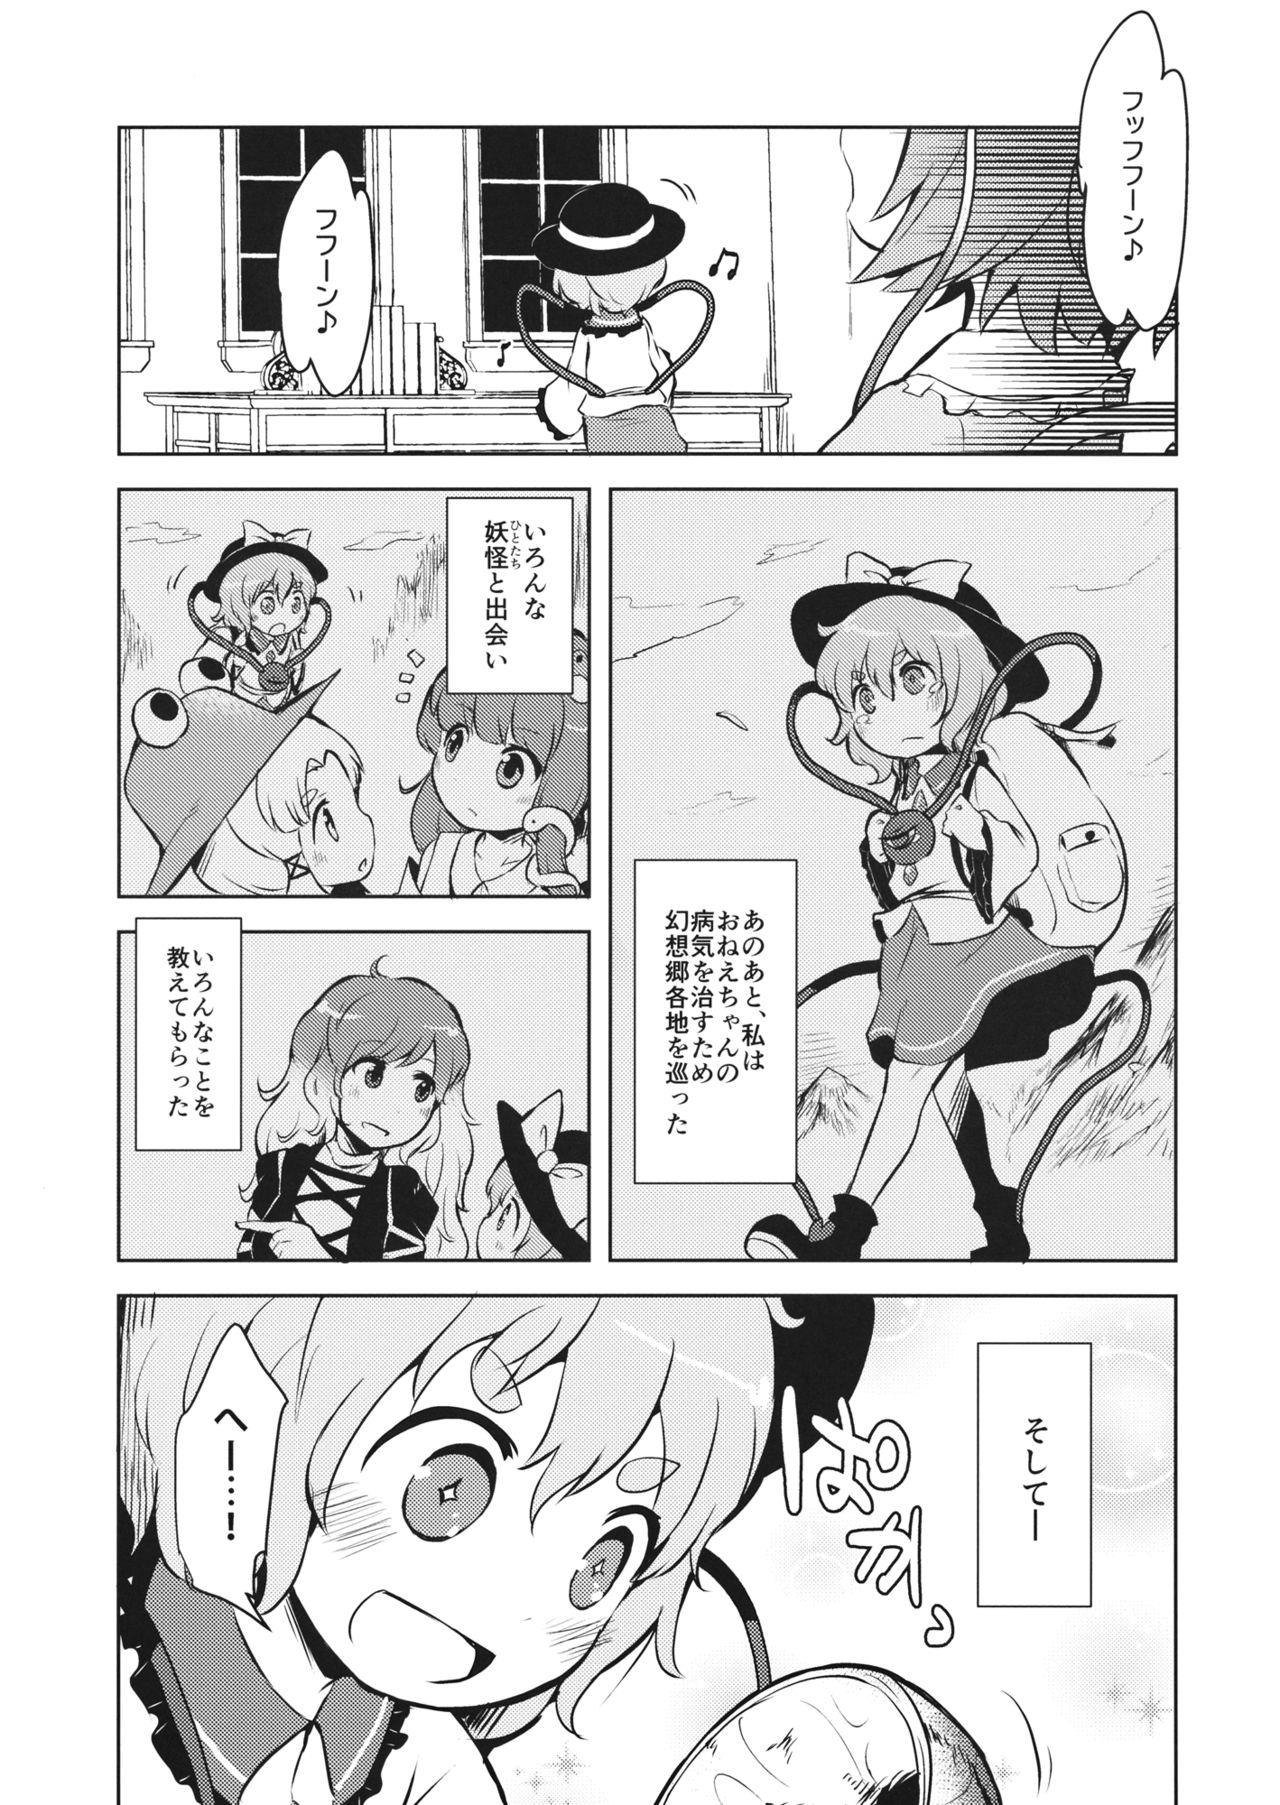 Voyeur FREAKS OUT! - Touhou project Petite Teenager - Page 8